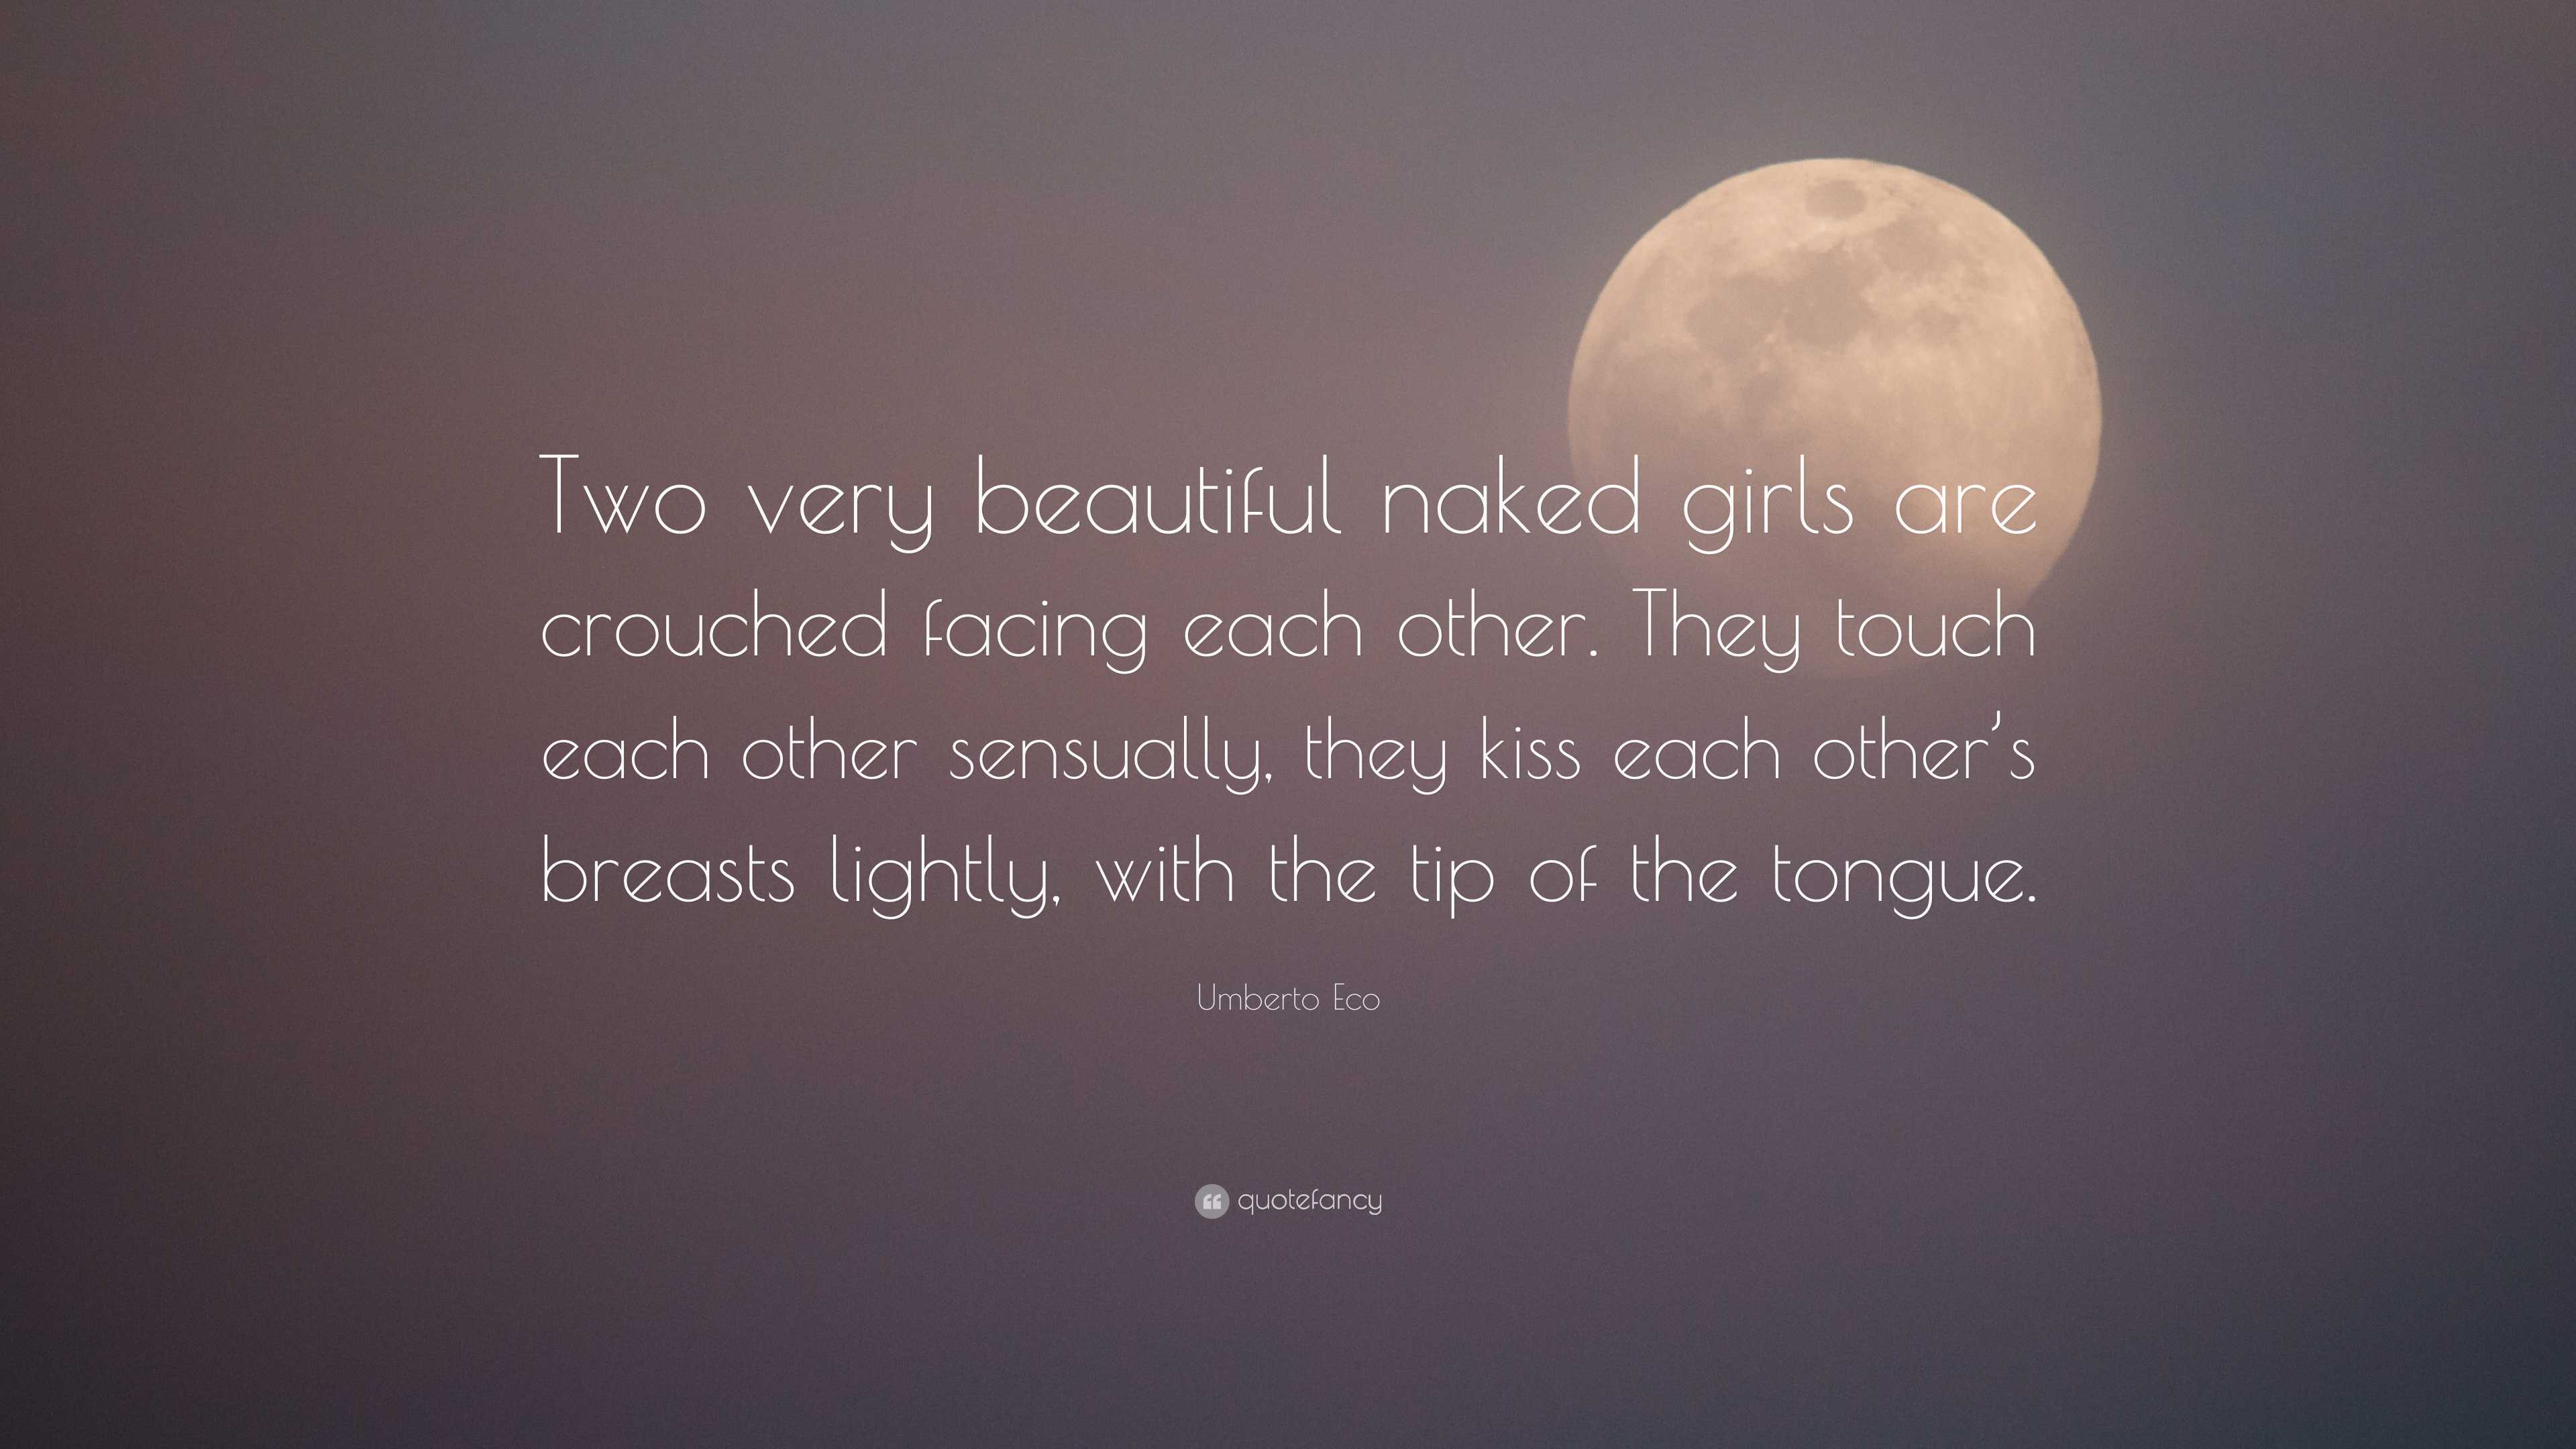 Umberto Eco Quote: “Two very beautiful naked girls are crouched